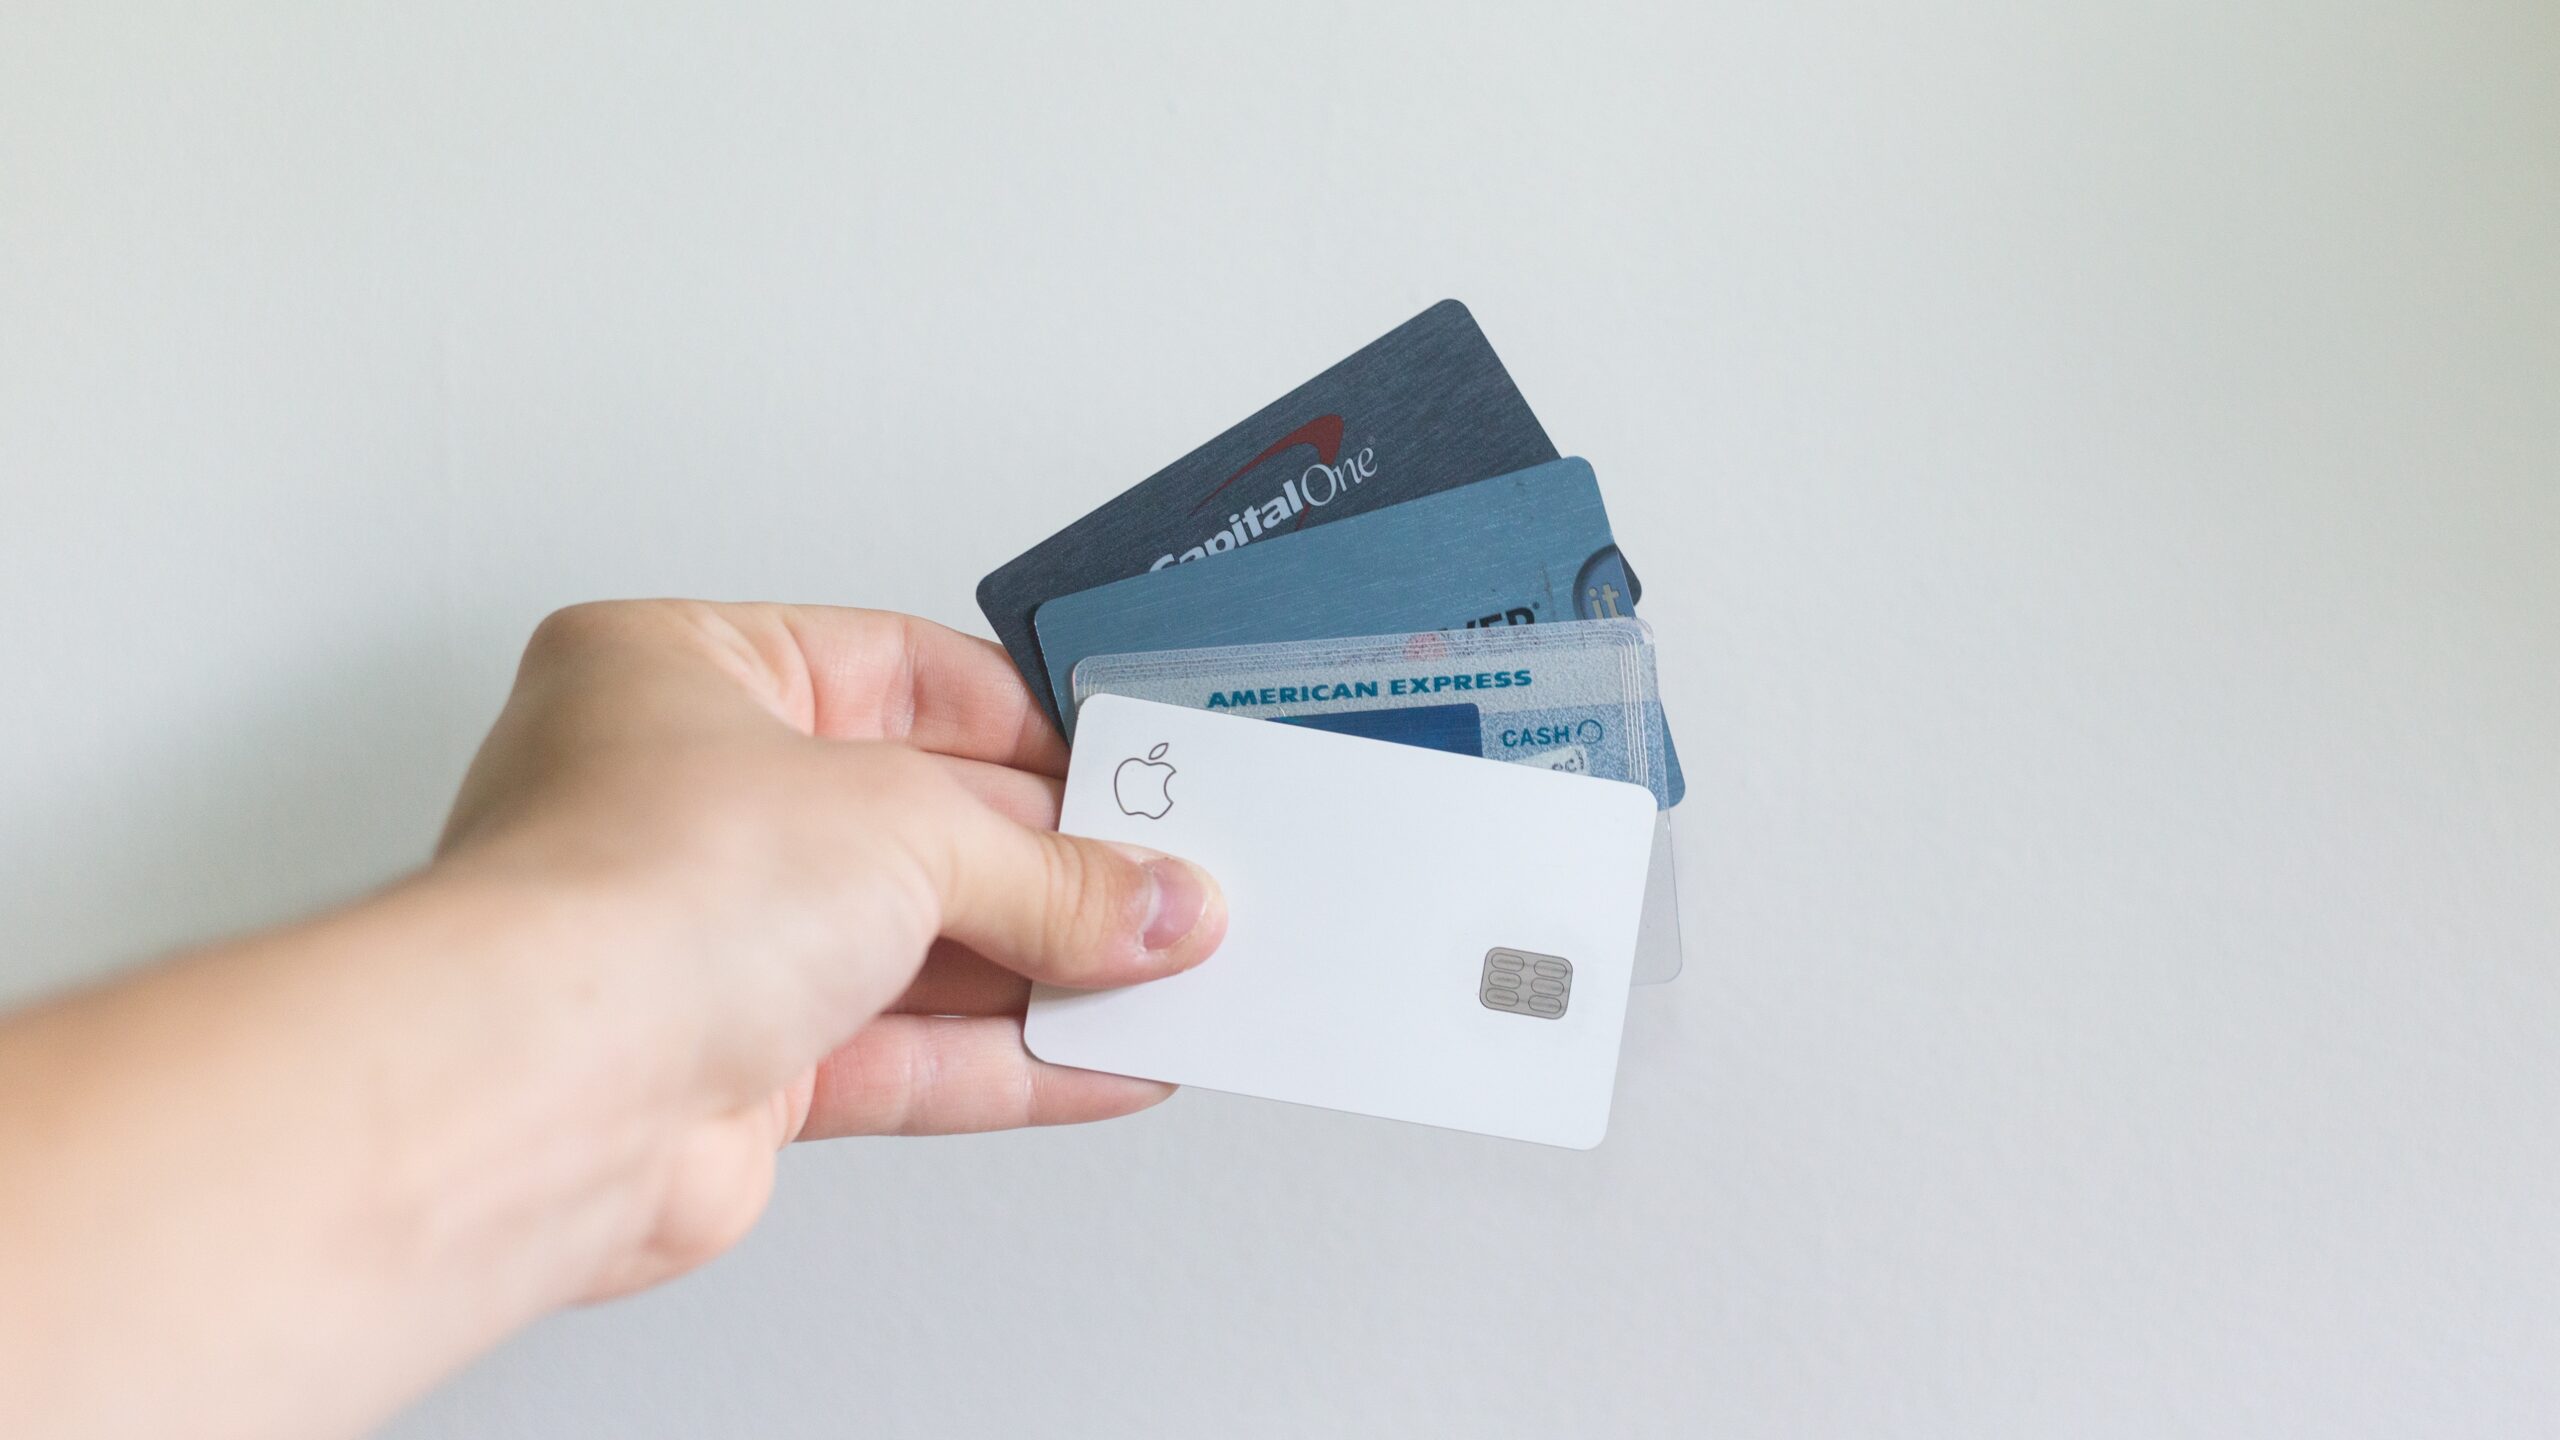 a hand holding four credit cards against a white background